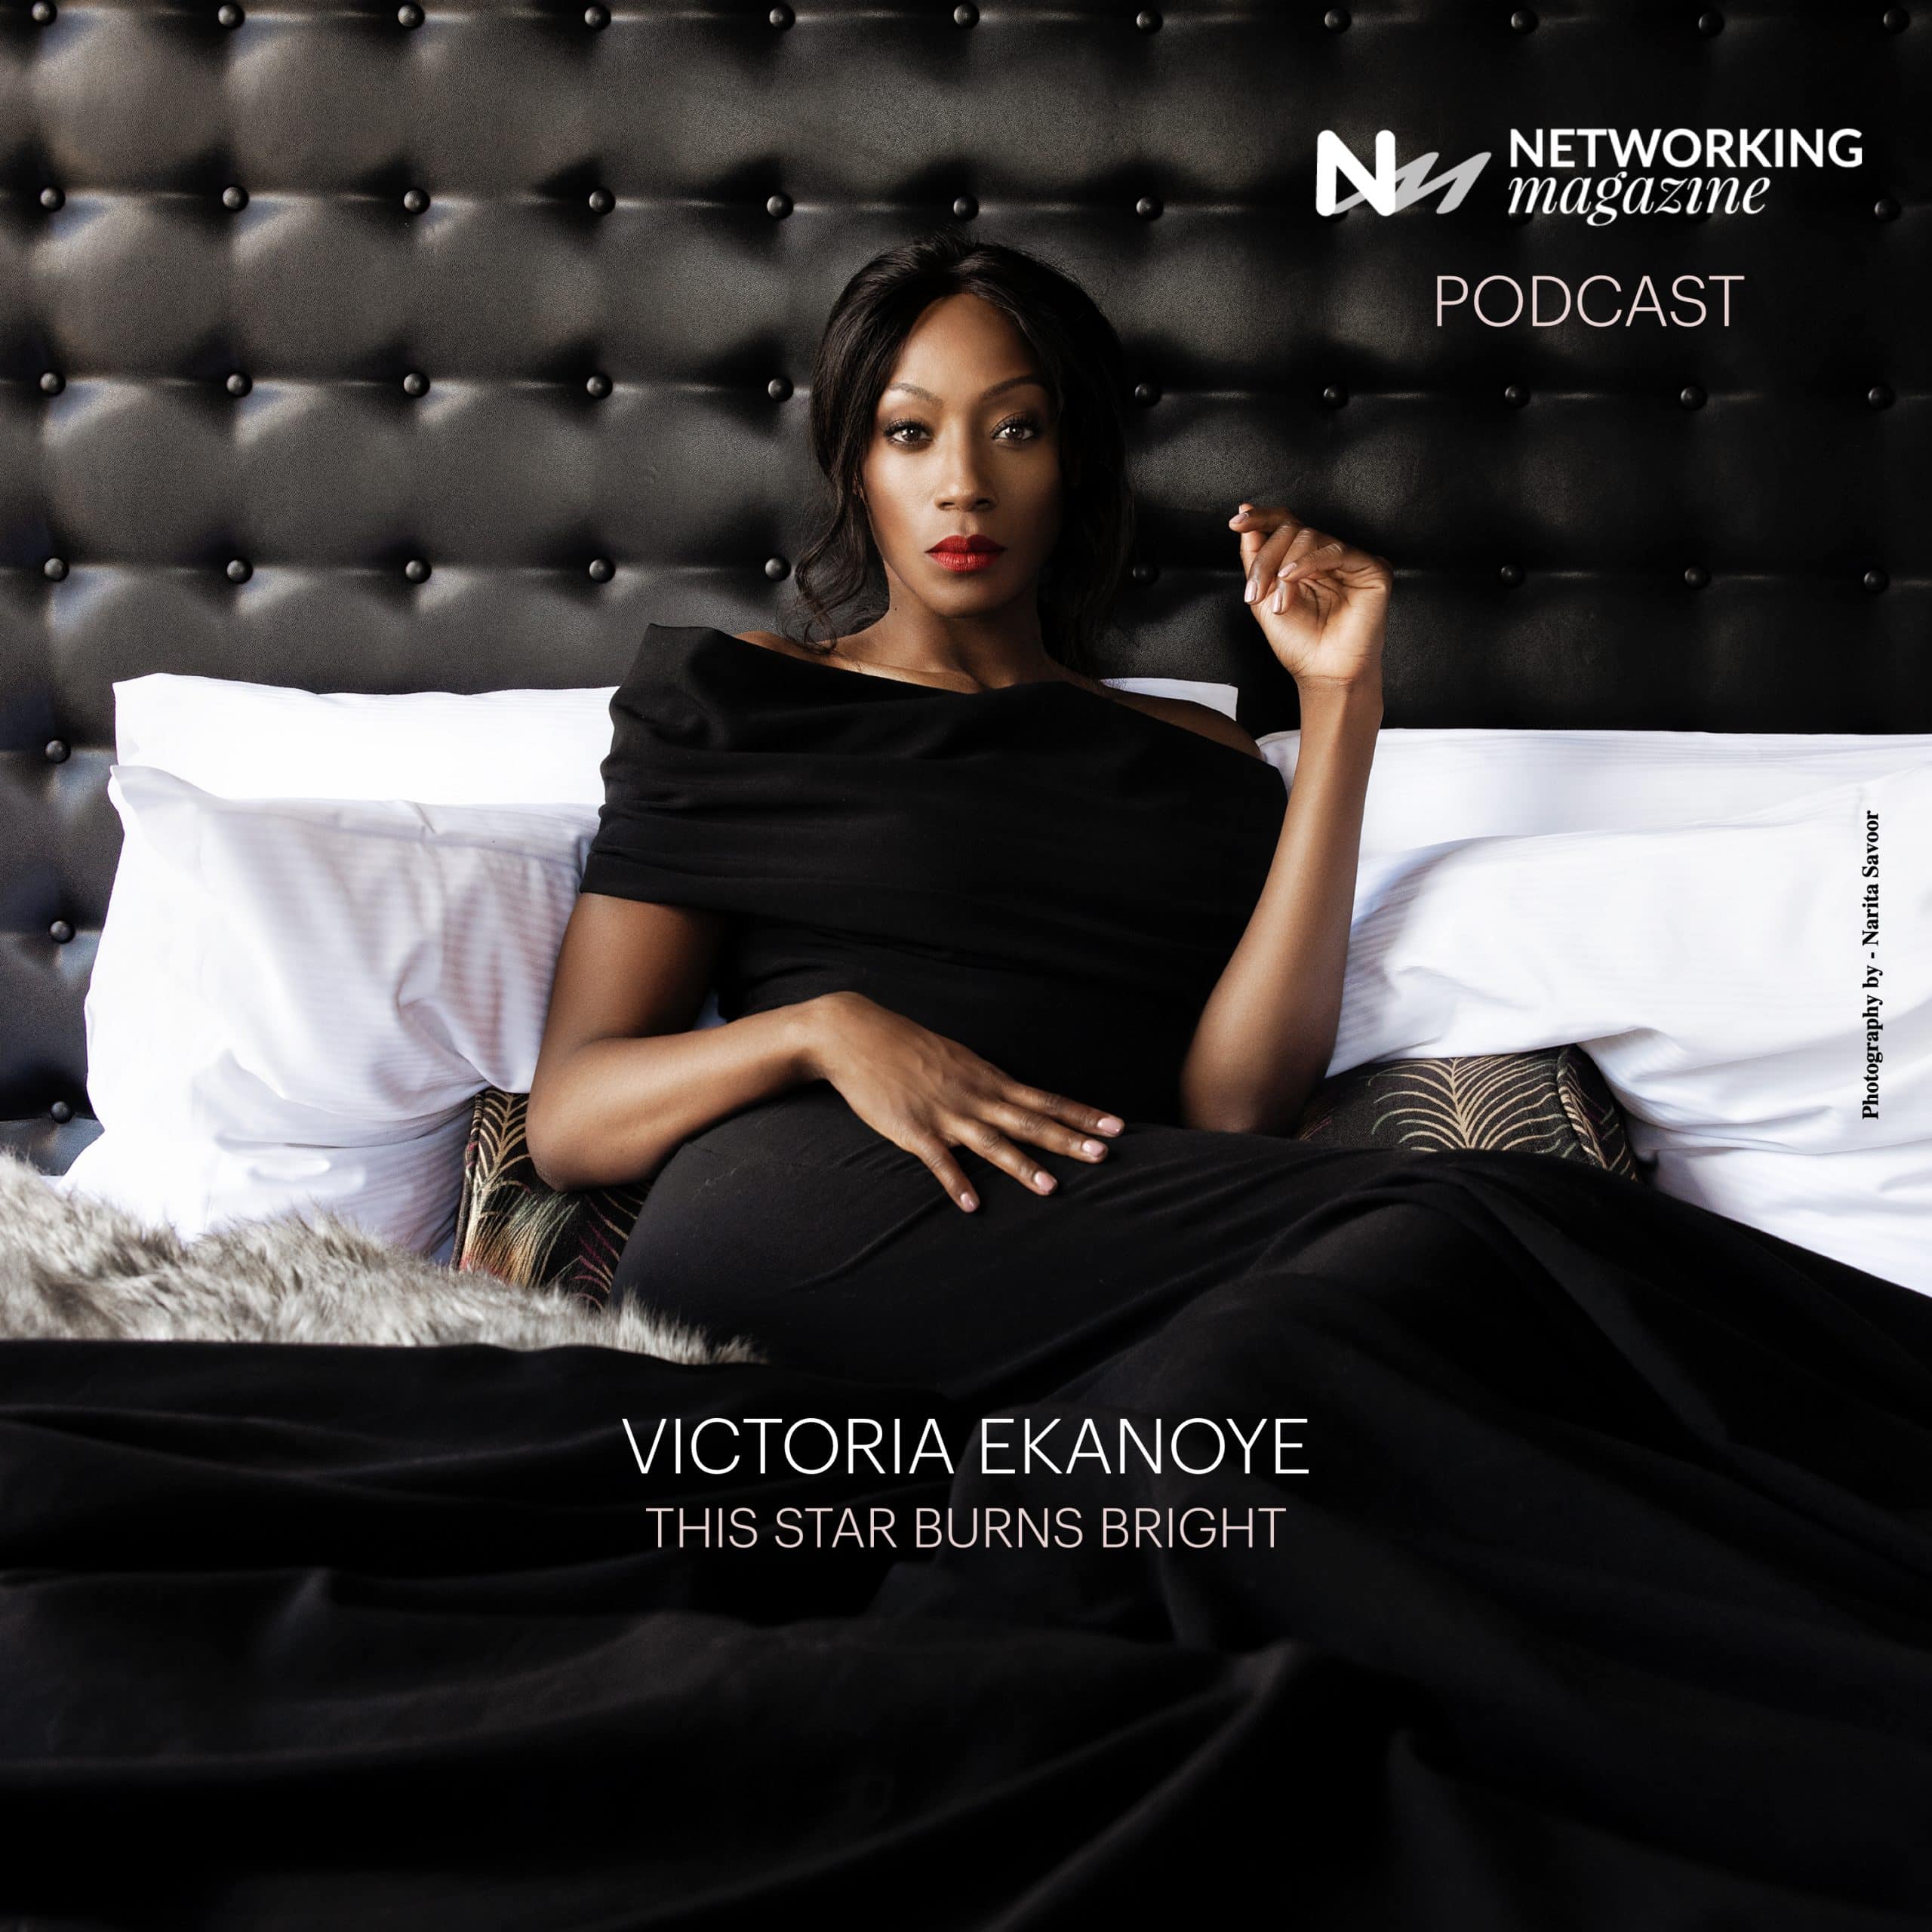 A networking Magazine podcast featuring Victoria Ekanoye. Photography by Narita Savoor